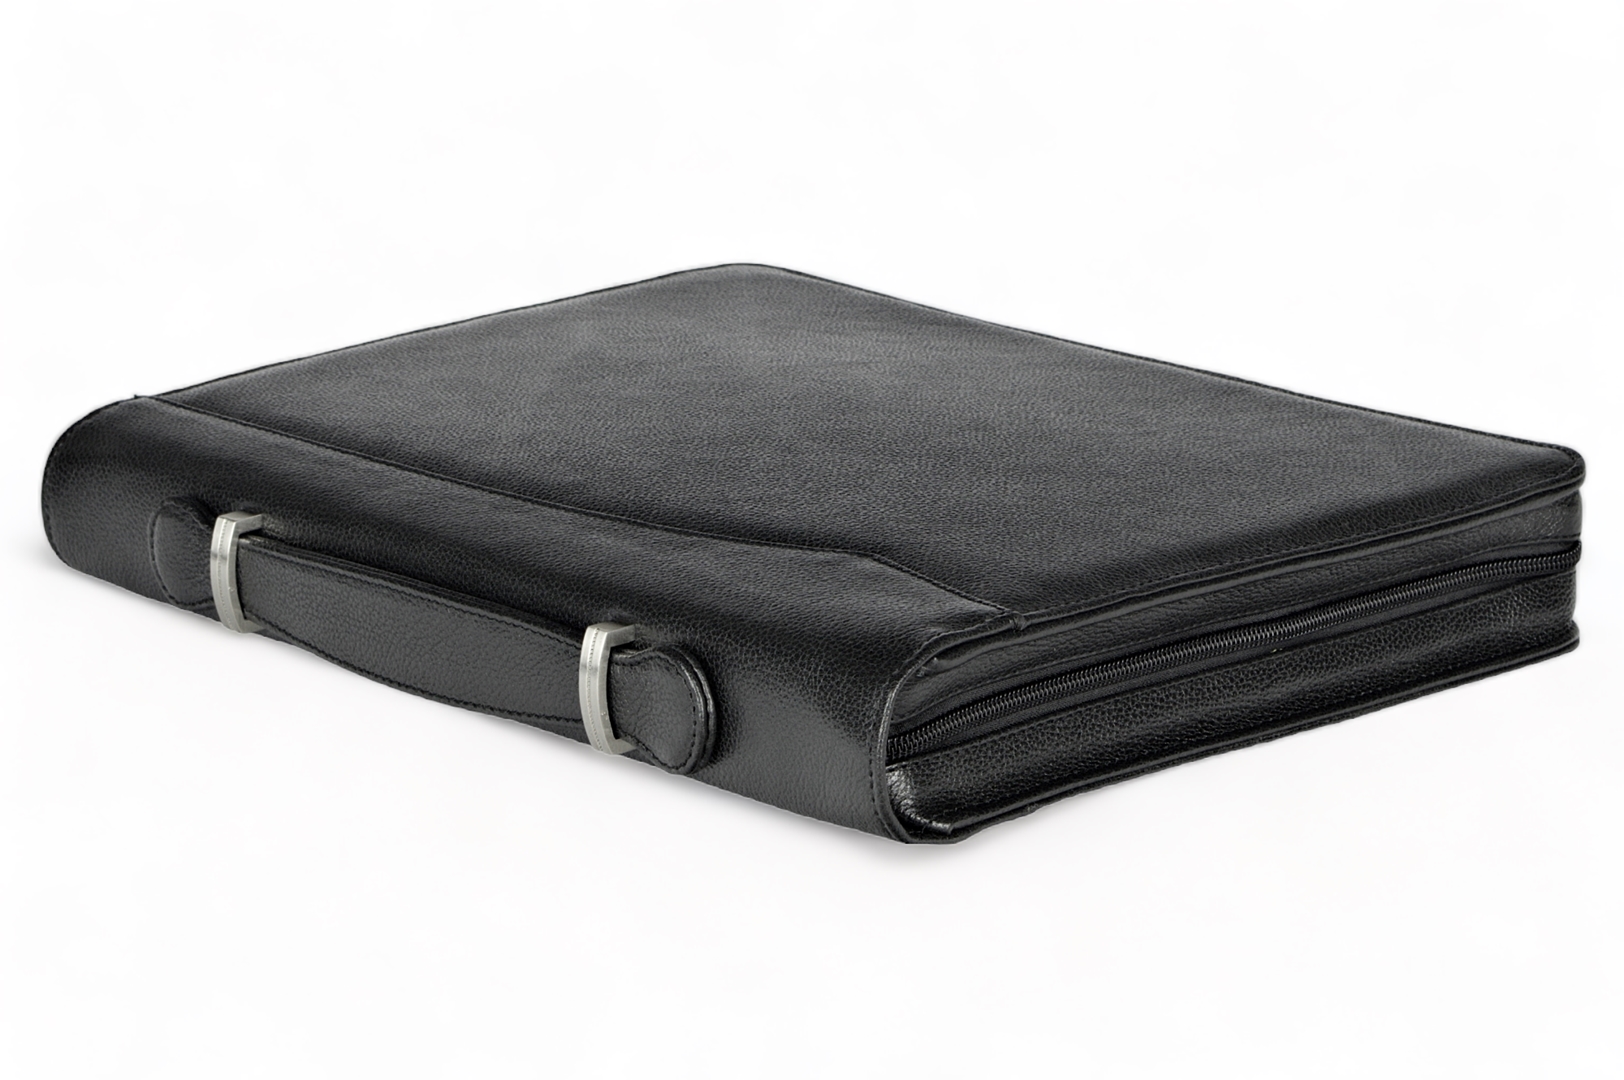 A4 zippered conference folder made of genuine leather. 24R EL 4-1F